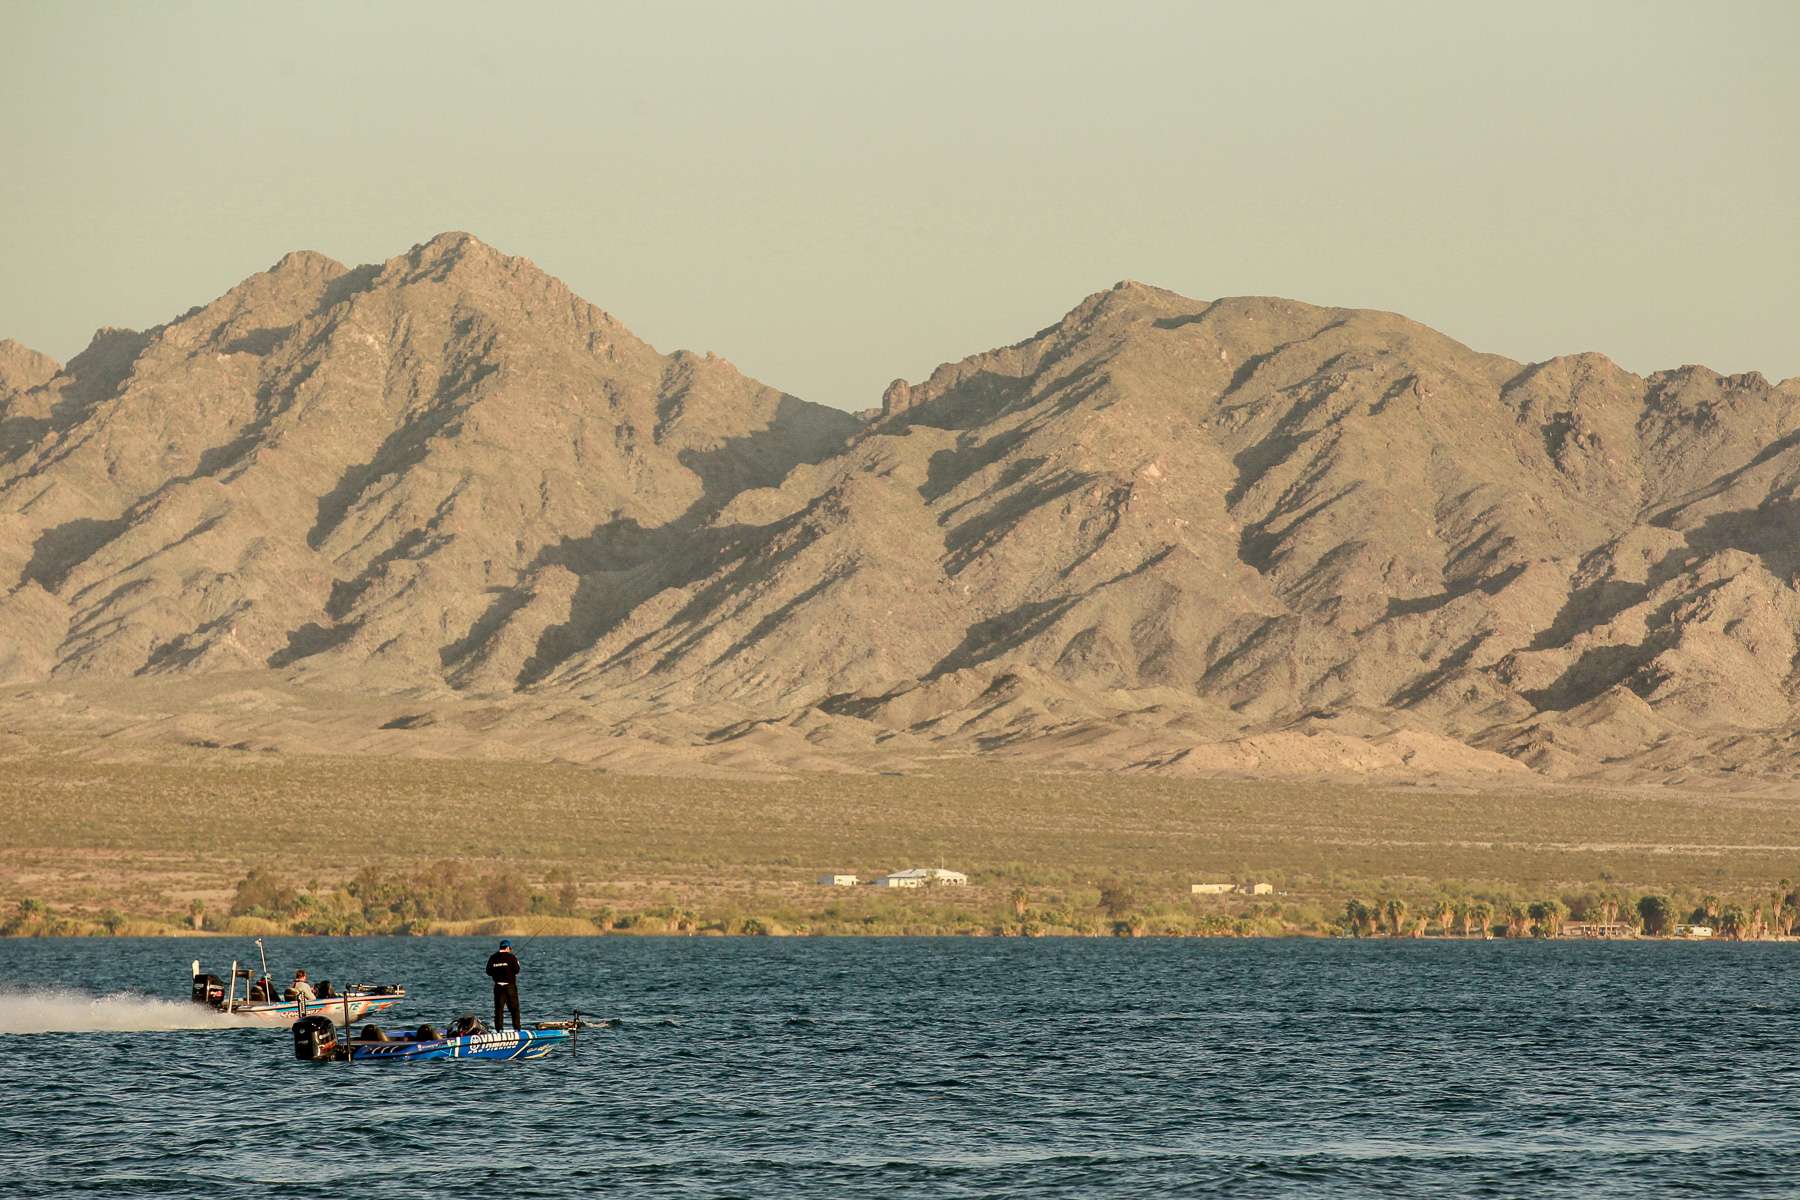 <h4>8. Lake Havasu, Arizona/California</h4> [19,300 acres] The Arizona Game and Fish Department, along with other stakeholders, has been adding artificial habitat here as part of a fisheries improvement program. And anglers are now benefiting from these efforts. With near-equal numbers of largemouth and smallmouth, you can successfully target the species of your choice. A new Colorado River waters smallmouth record for Arizona was set here in February with an impressive 6.28-pound fish.